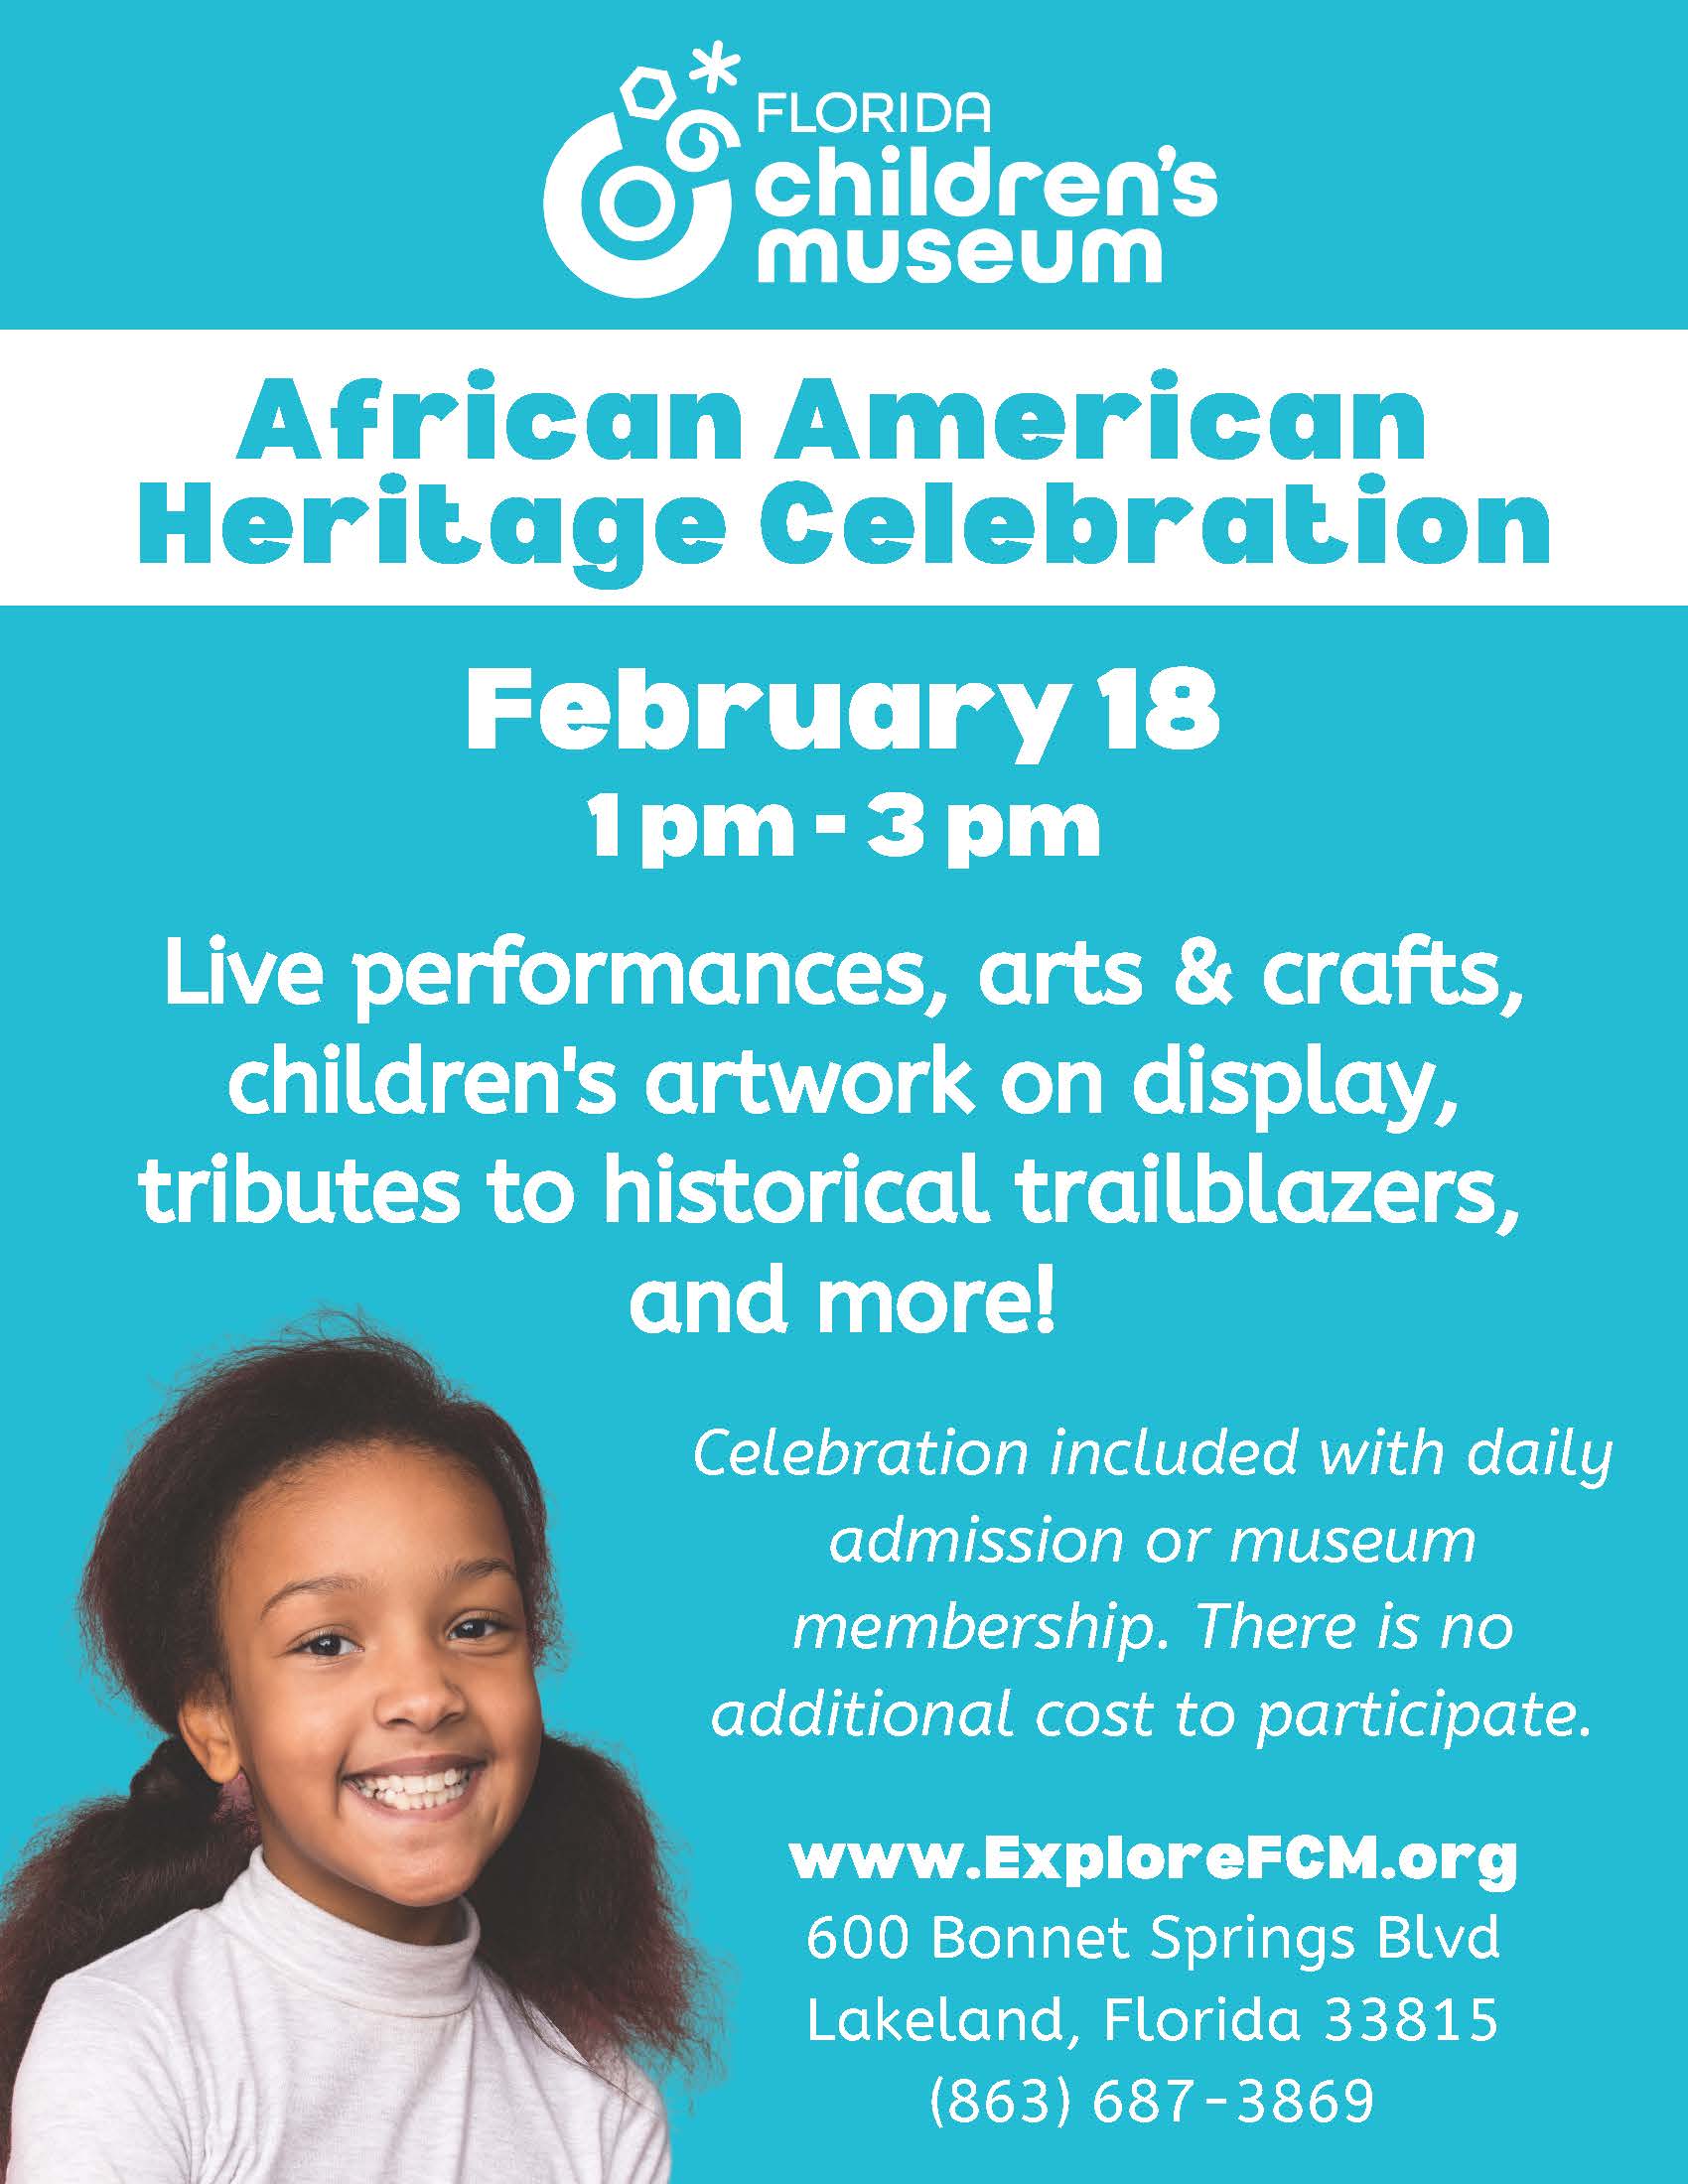 Join Florida Children's Museum for a celebration of African American heritage! This event features live performances, arts & crafts, children's artwork on display, tributes to historical trailblazers, and more! Celebration is included with daily admission or museum membership. There is no additional cost to participate.